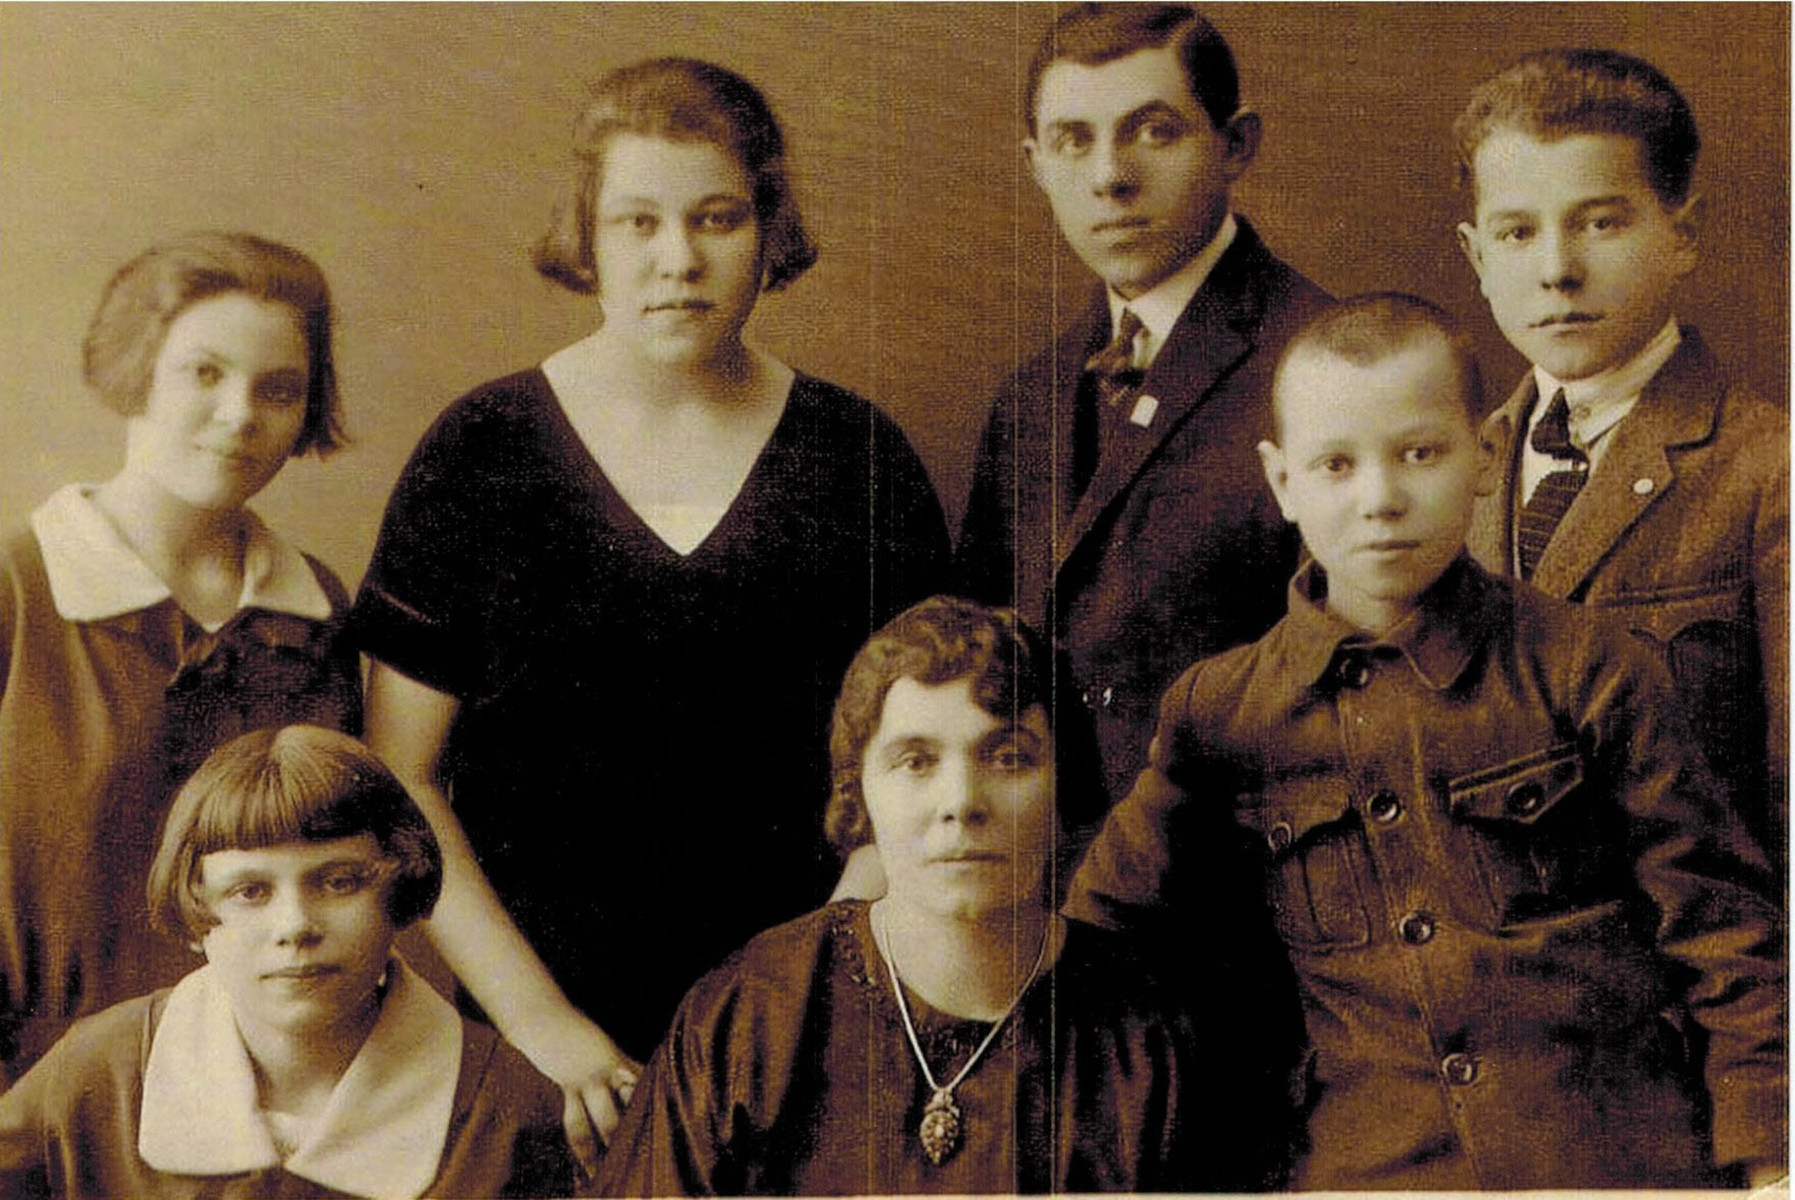 Prewar photograph of Esther Birnbach and her six youngest children: Ceil, Pessel, Meyer, Moe, Sol, Esther and Florence.